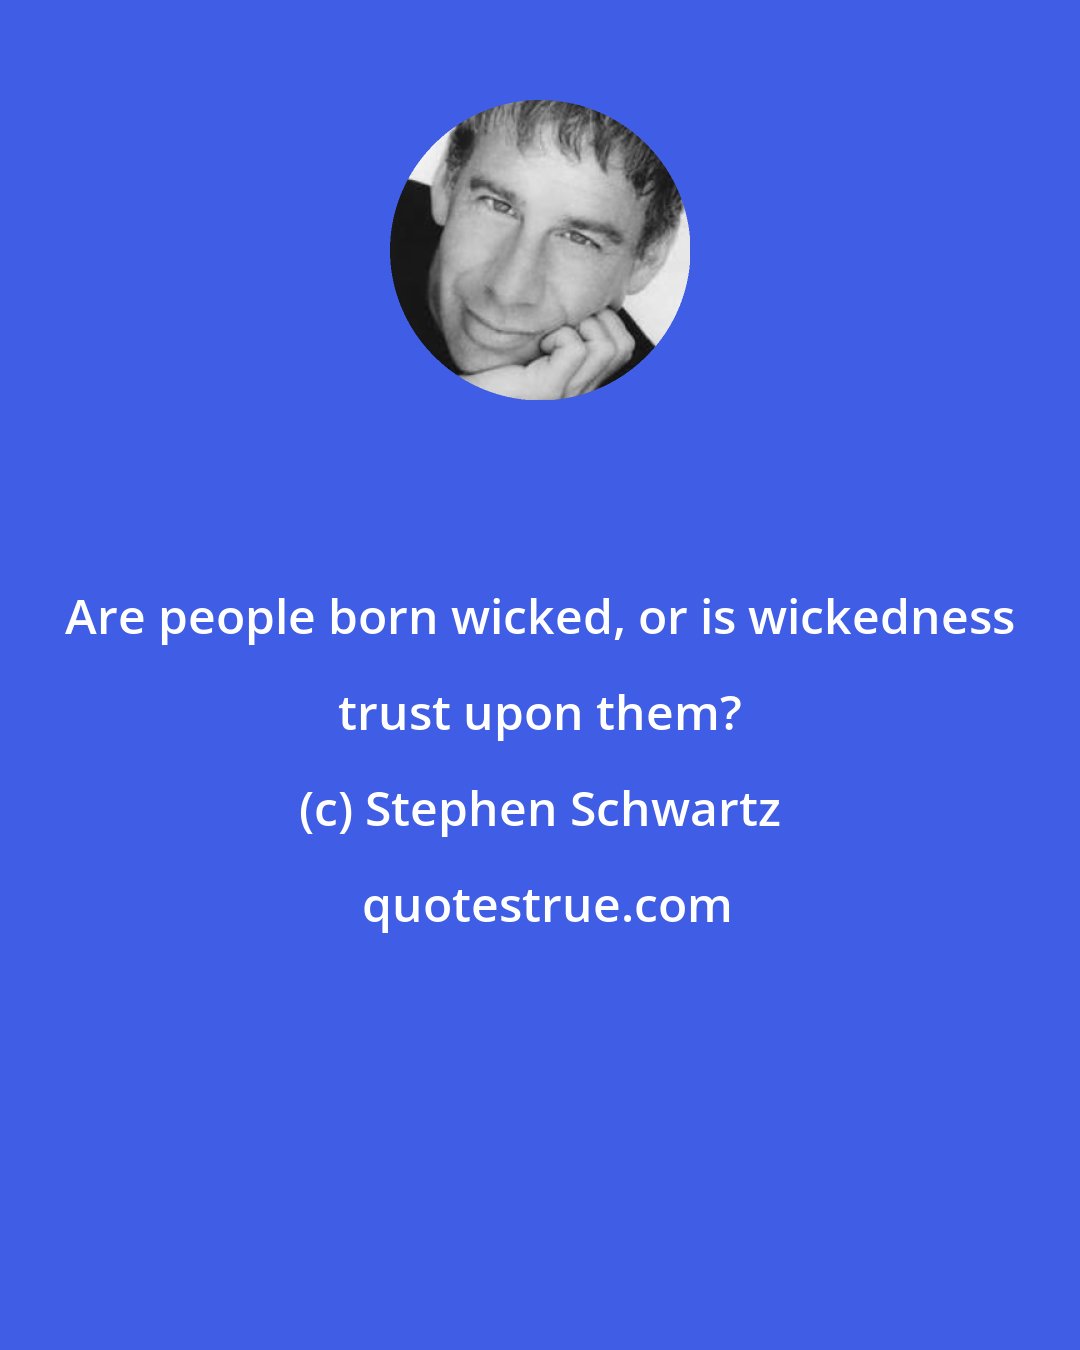 Stephen Schwartz: Are people born wicked, or is wickedness trust upon them?